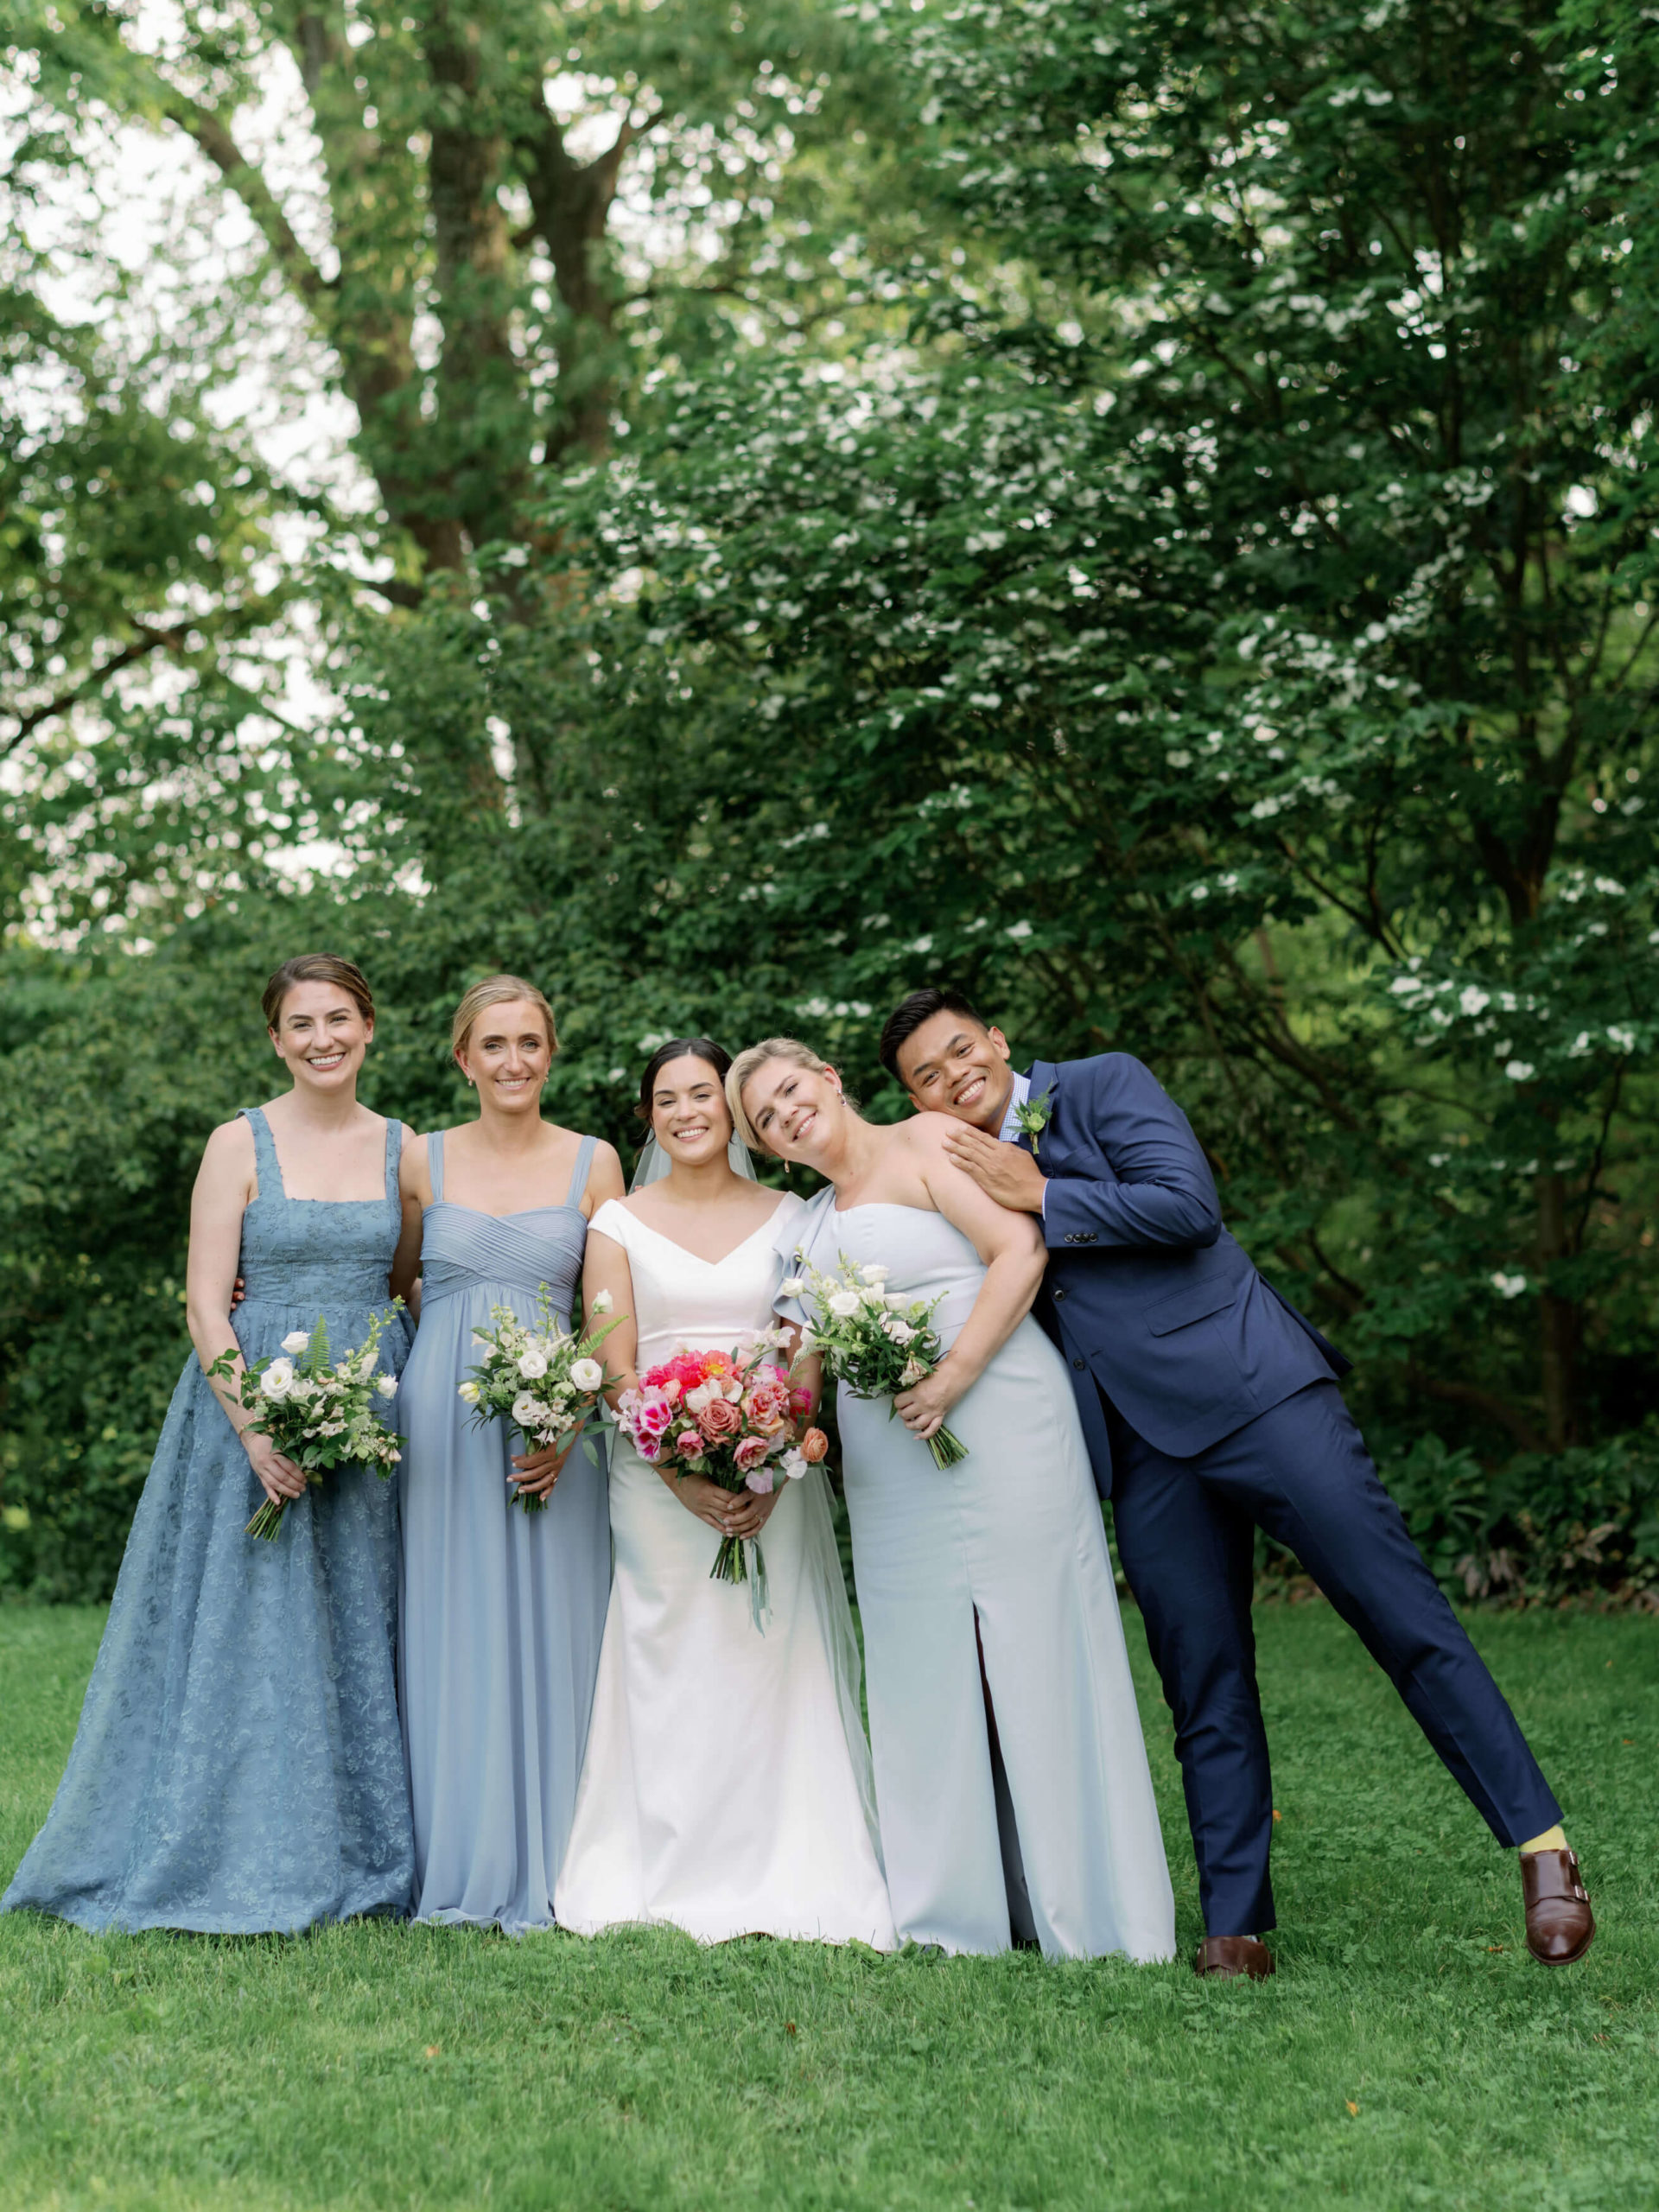 The bride and her bridesmaids wearing their 2022 bridesmaid dress. Image by Jenny Fu Studio